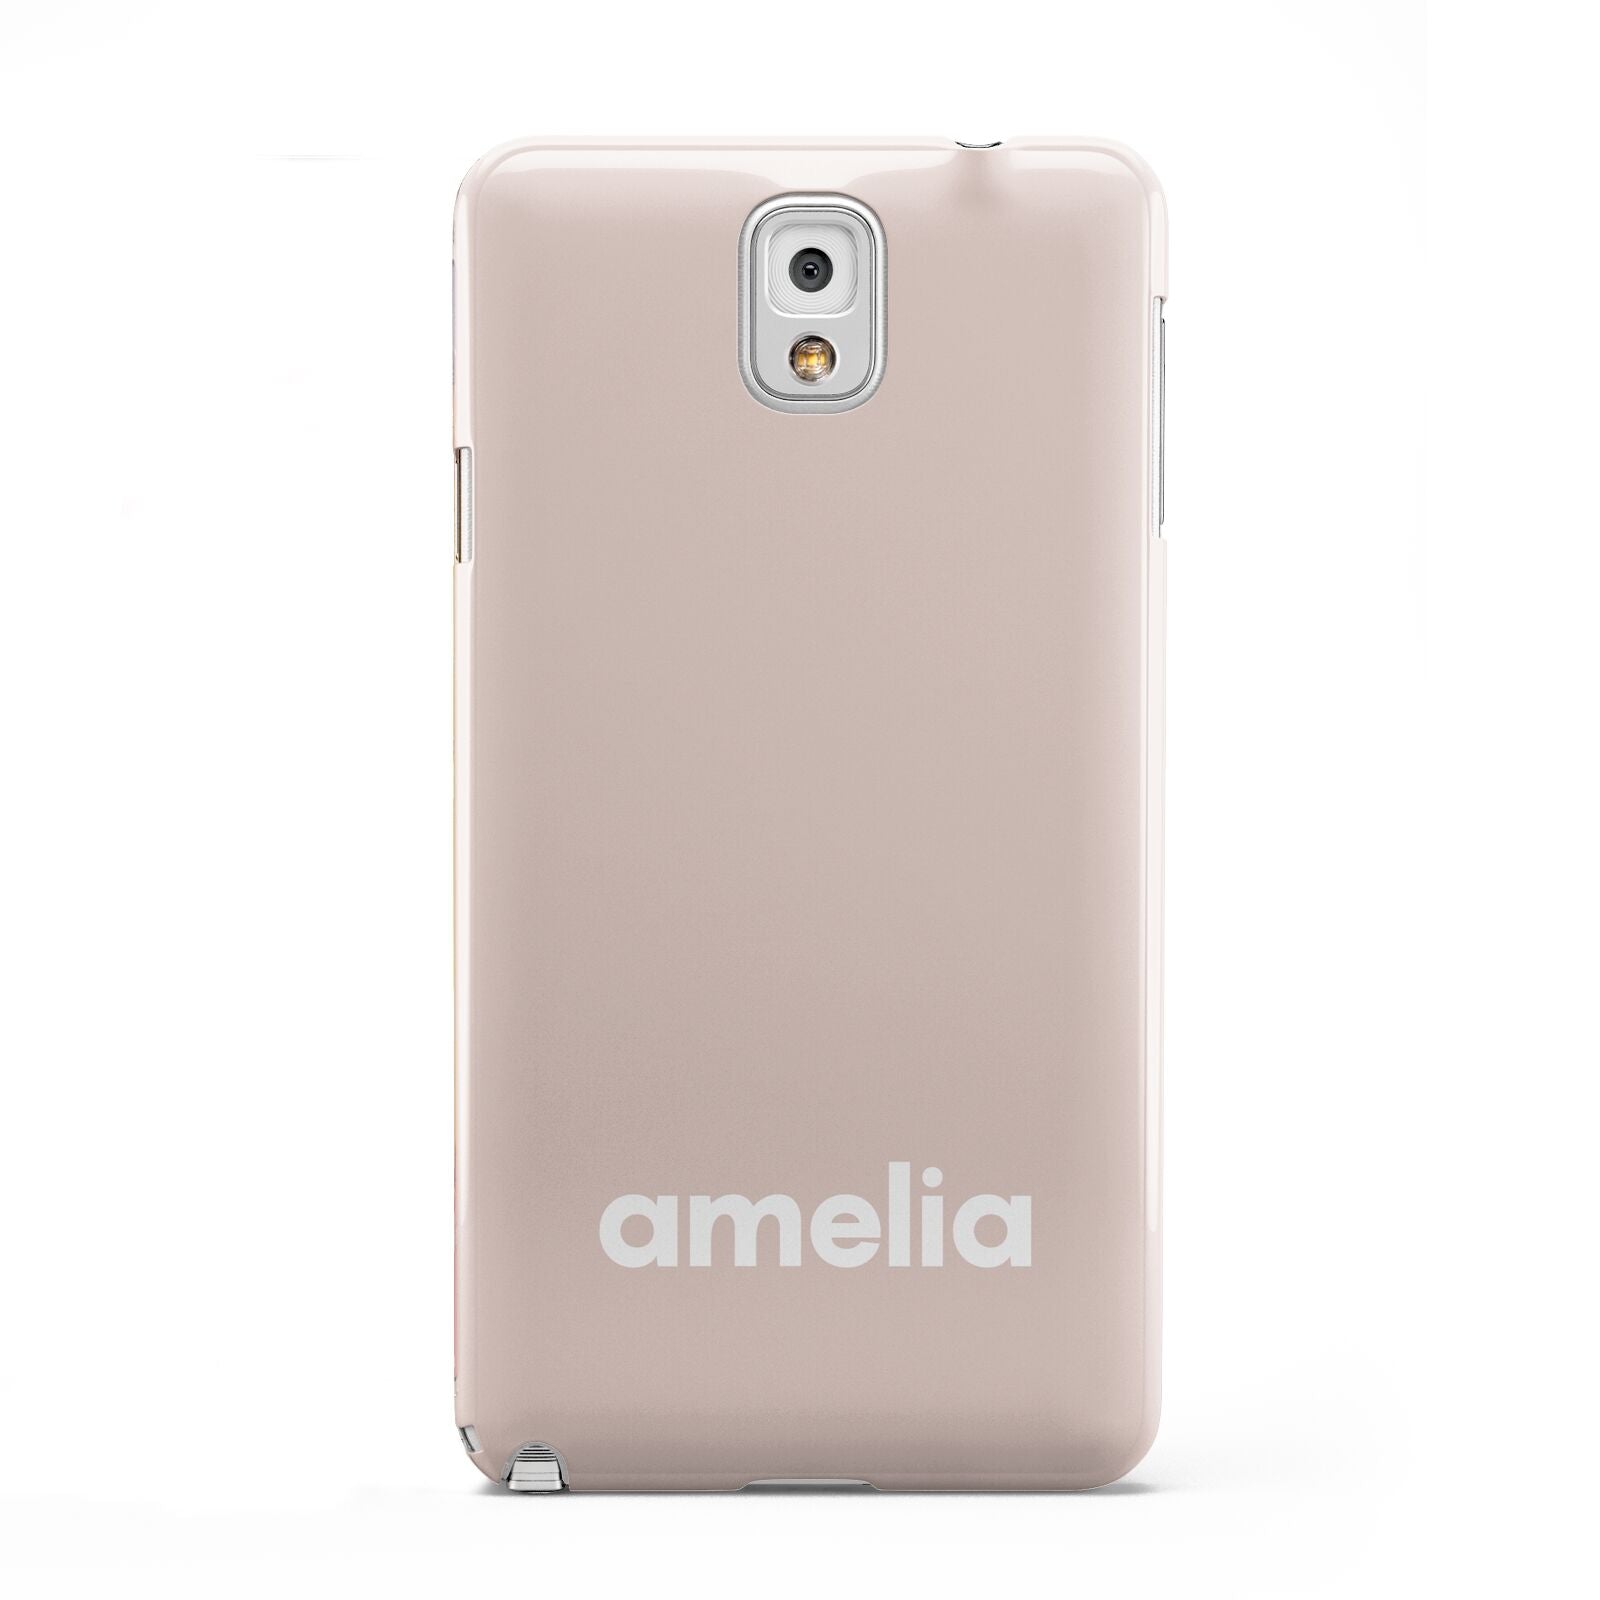 Simple Blush Pink with Name Samsung Galaxy Note 3 Case